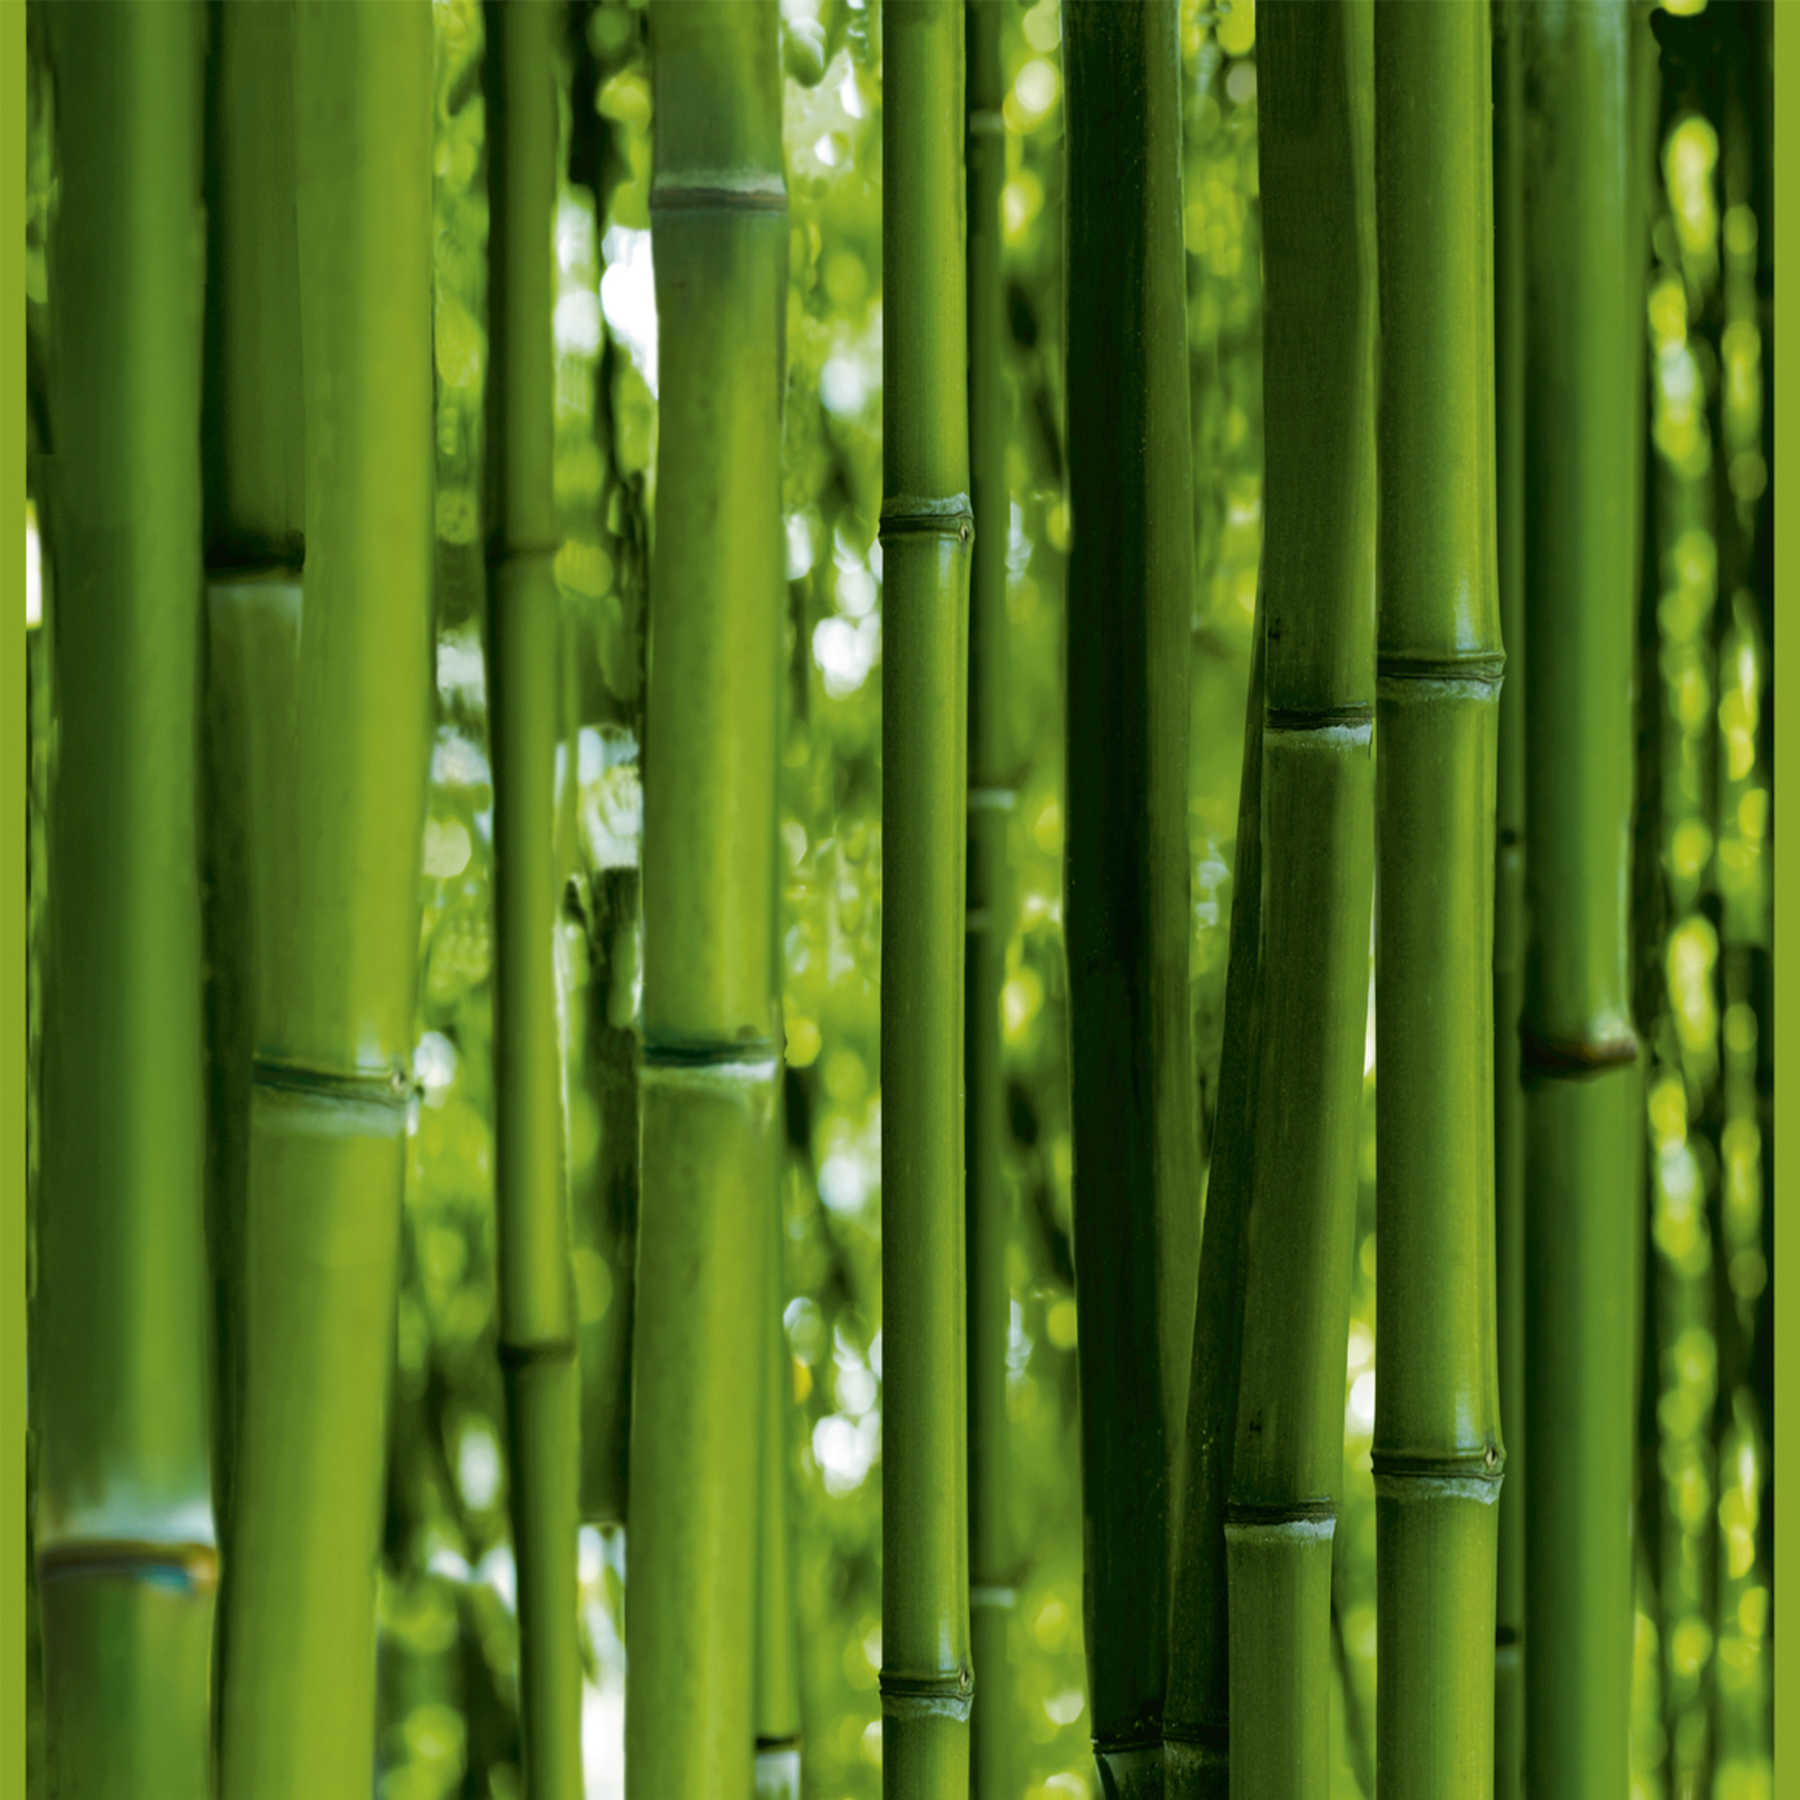             Self-adhesive pop up wallpaper panel with bamboo forest - green
        